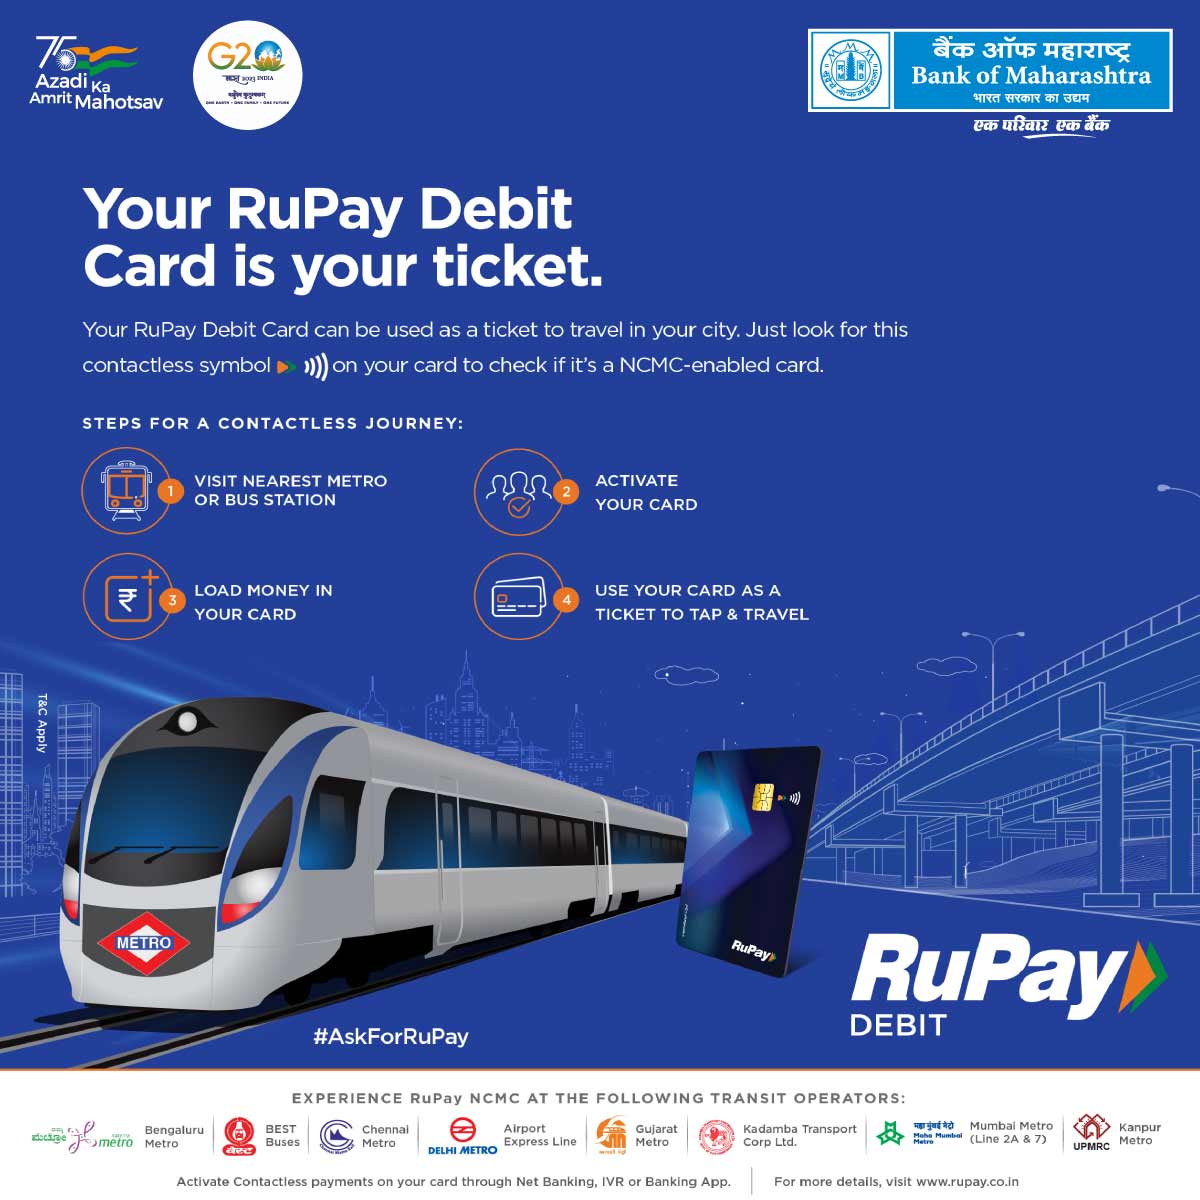 Unlock seamless travel experiences with your #RuPay #debitcard! Use it as your ticket for hassle-free commuting on metro or bus stations in your city. Just look for the contactless symbol and enjoy the convenience of NCMC-enabled transactions.

#RuPayDebitCard #TicketToRide